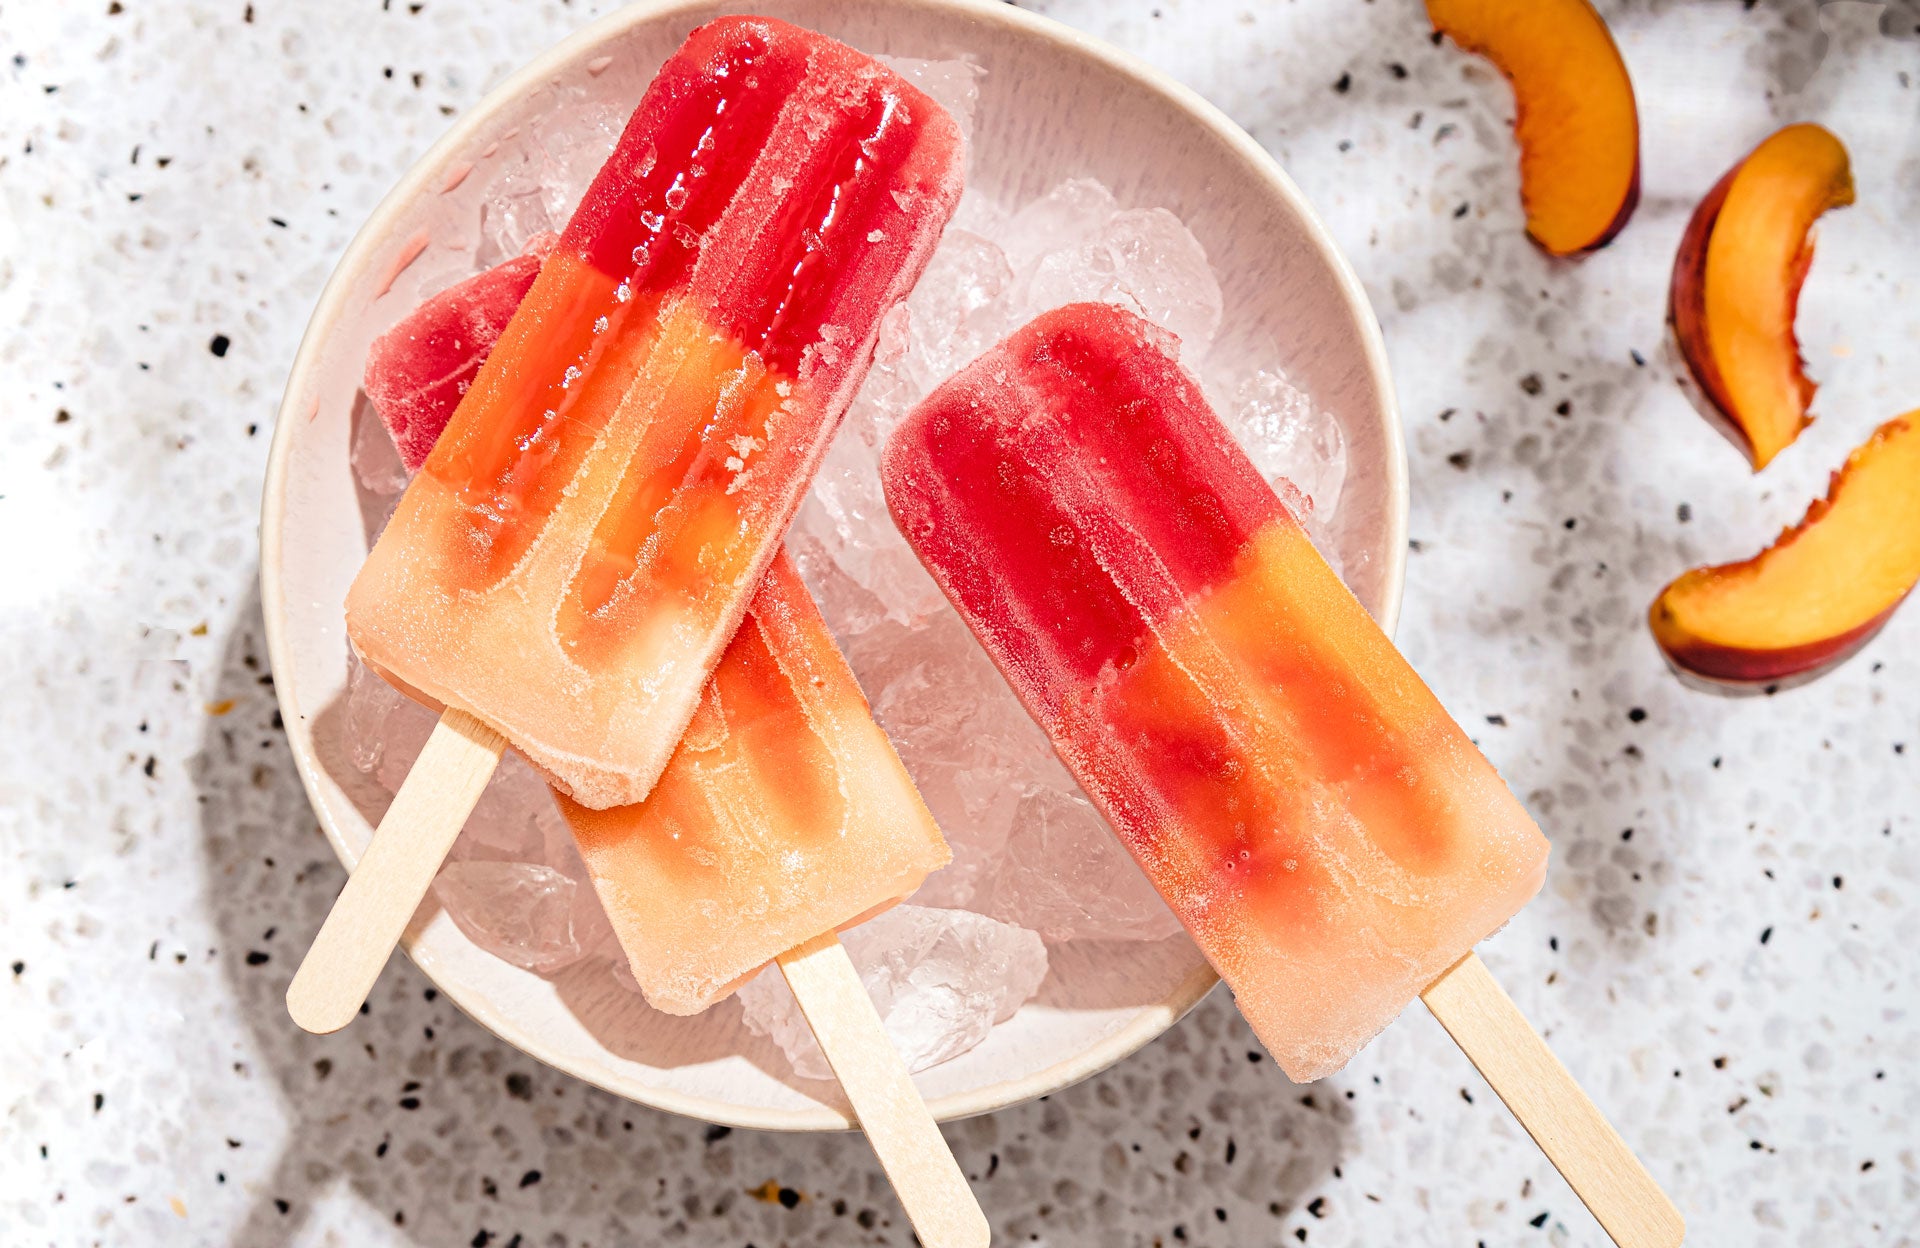 15 Best Popsicle Molds: Silicone, Plastic & More 2019